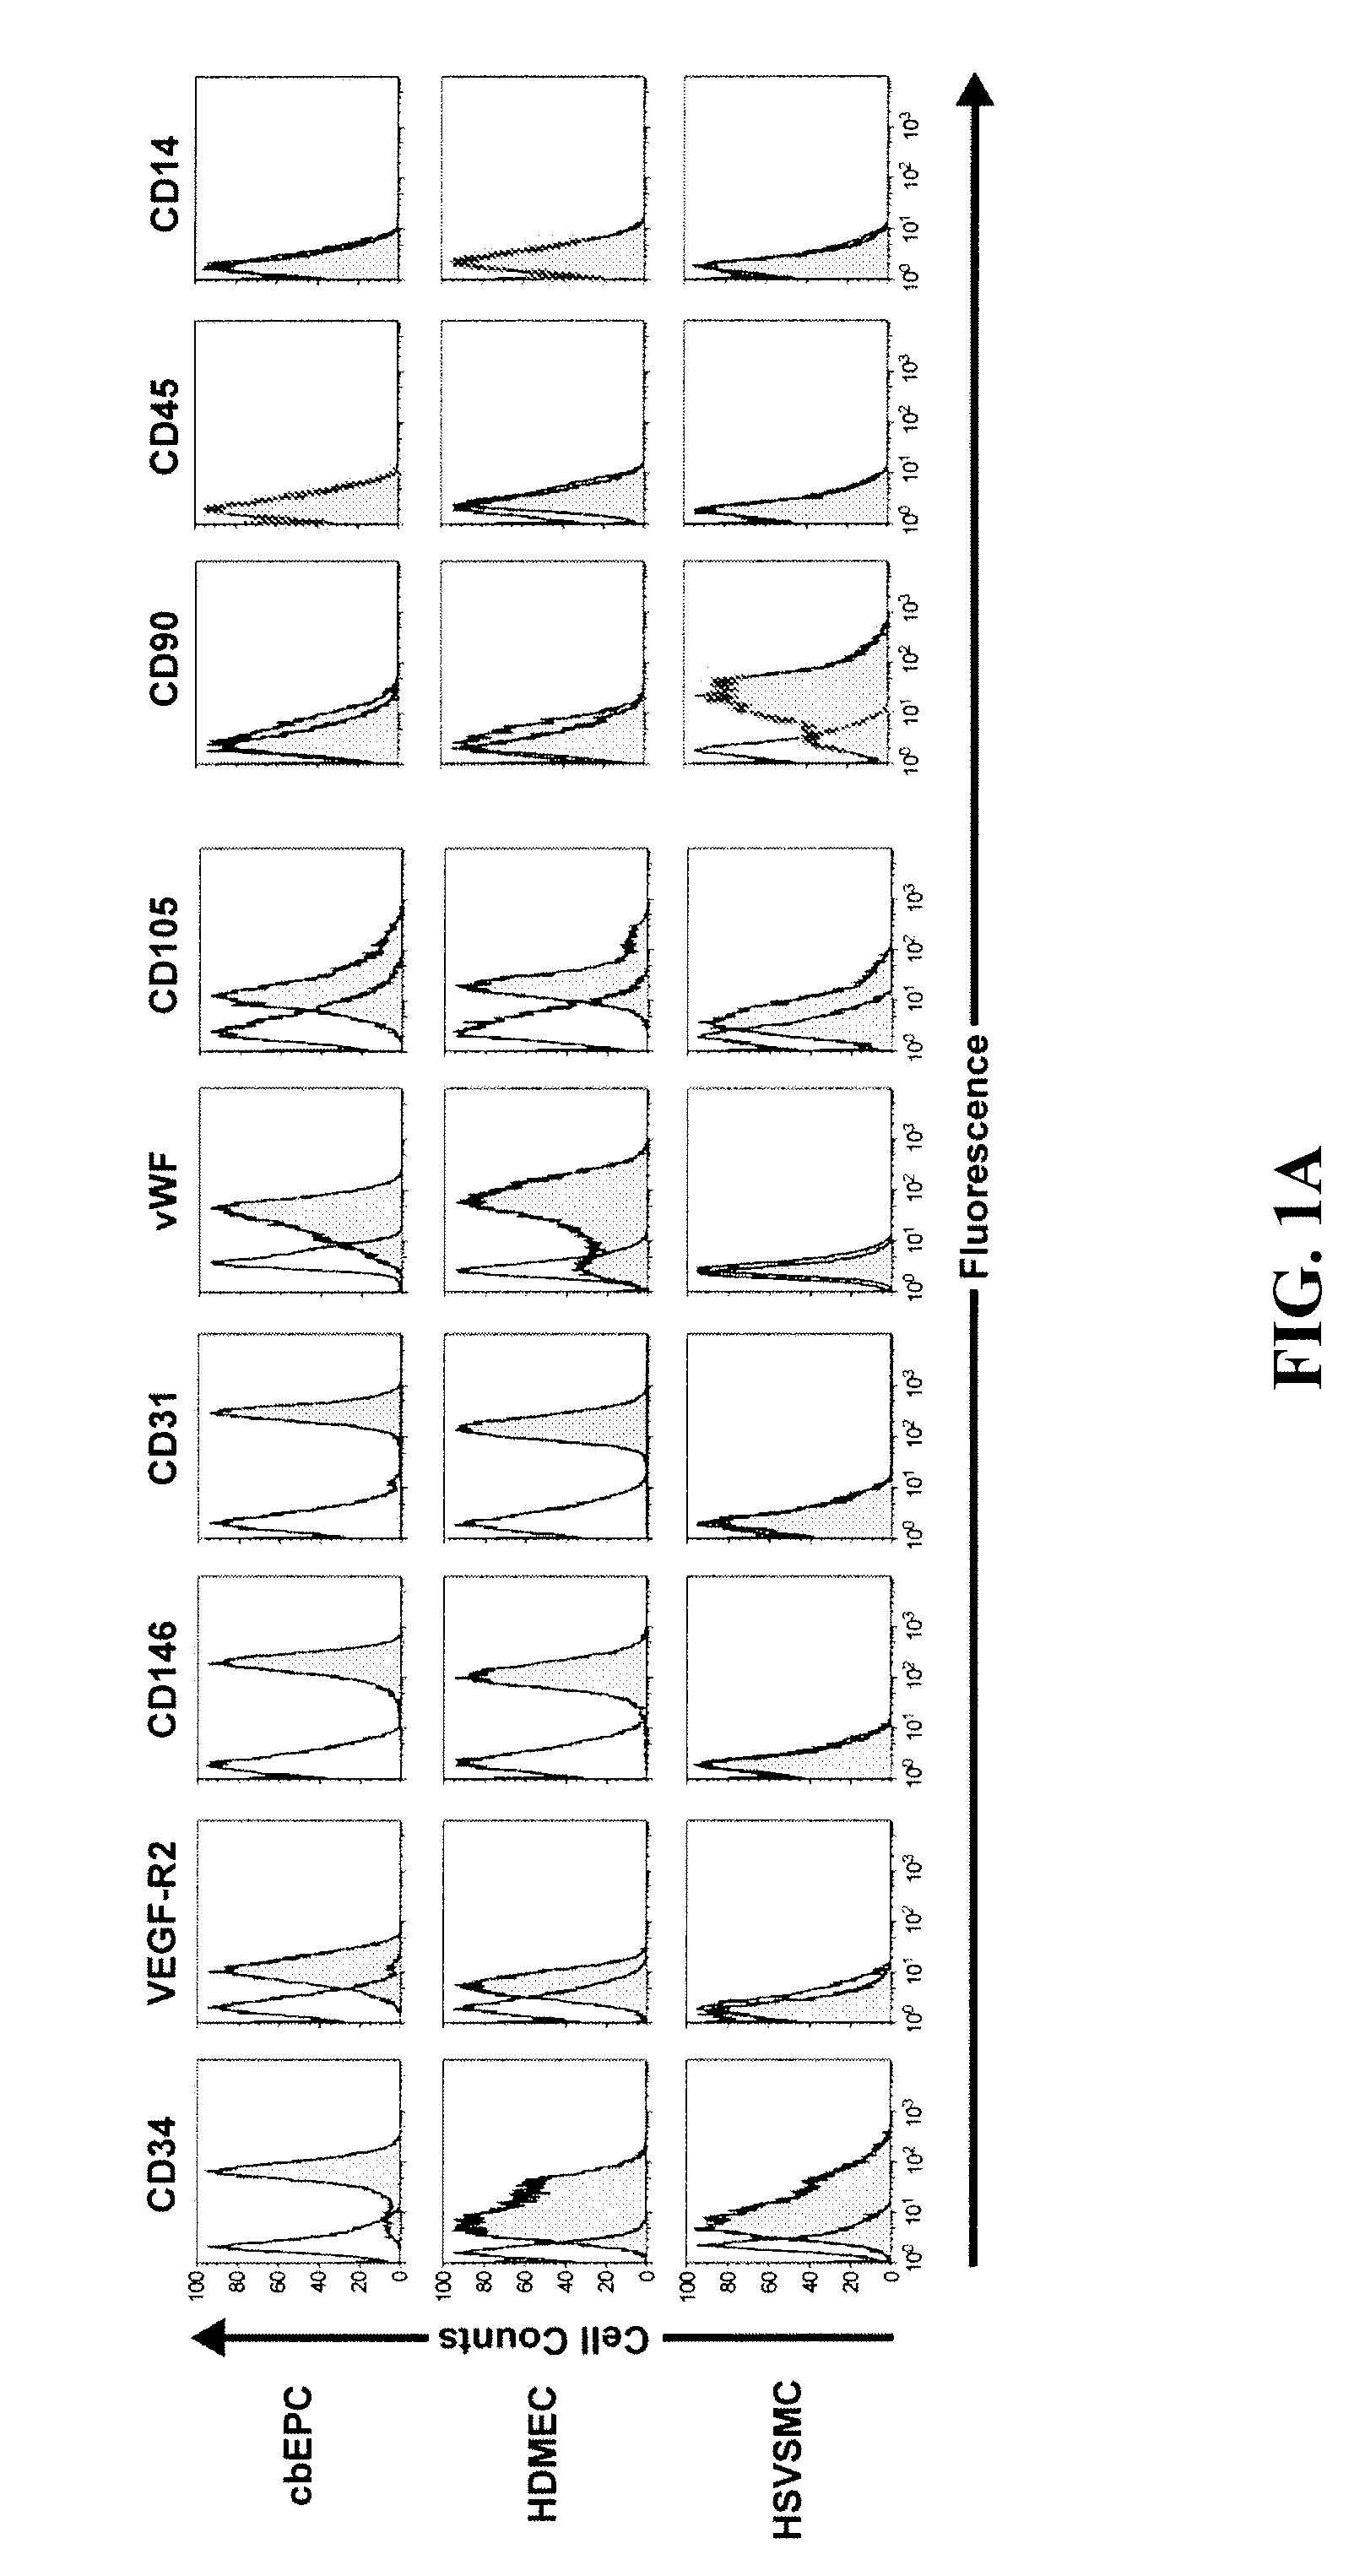 Methods for promoting neovascularization